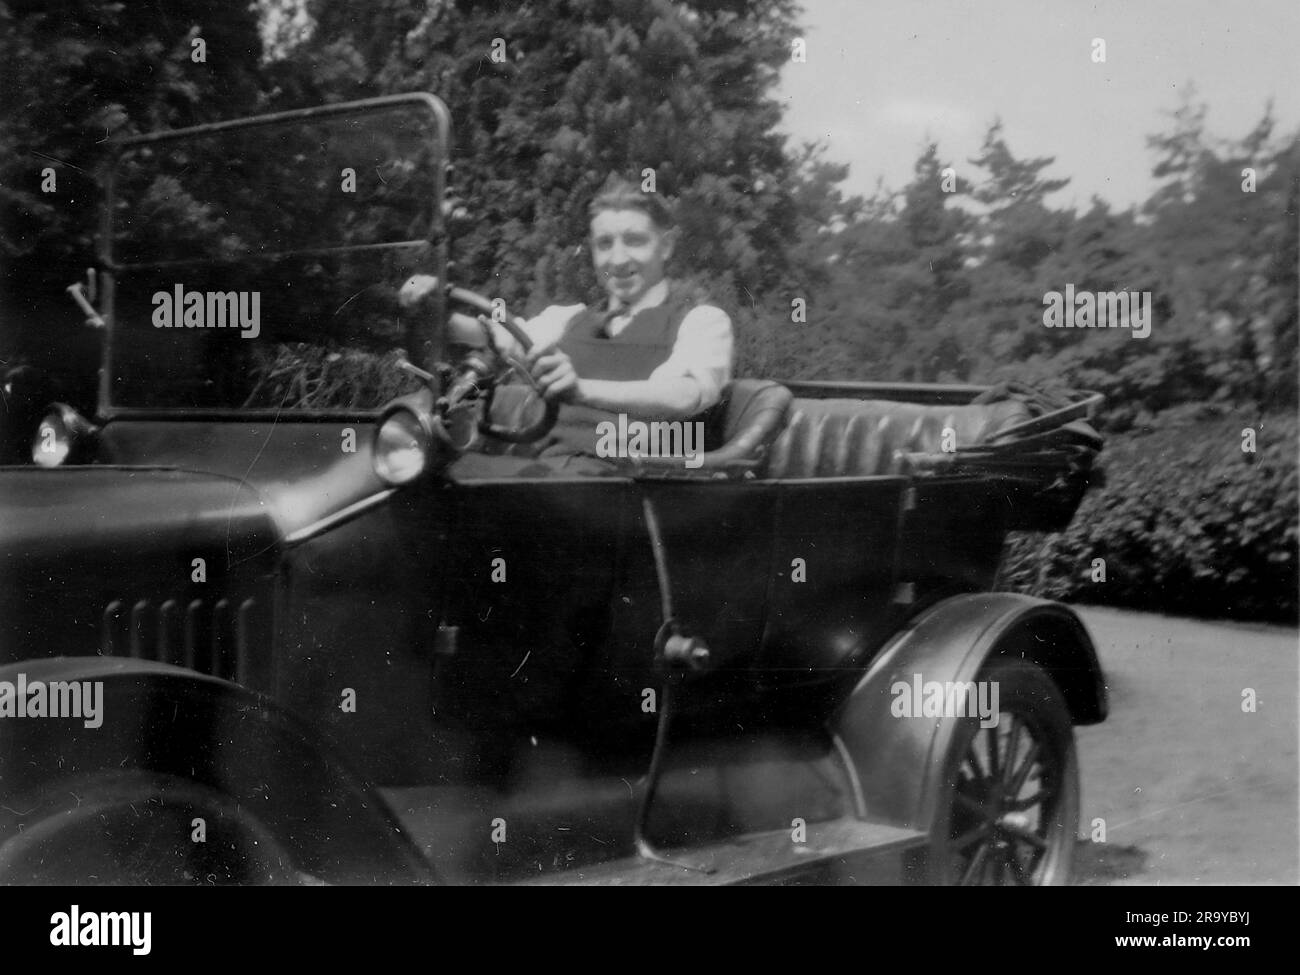 A man driving an open top car. Photo from a family album of snapshot images mainly taken in the UK, during the 1920s. The family lived in Witley, Surrey, and had some links to the military. Stock Photo